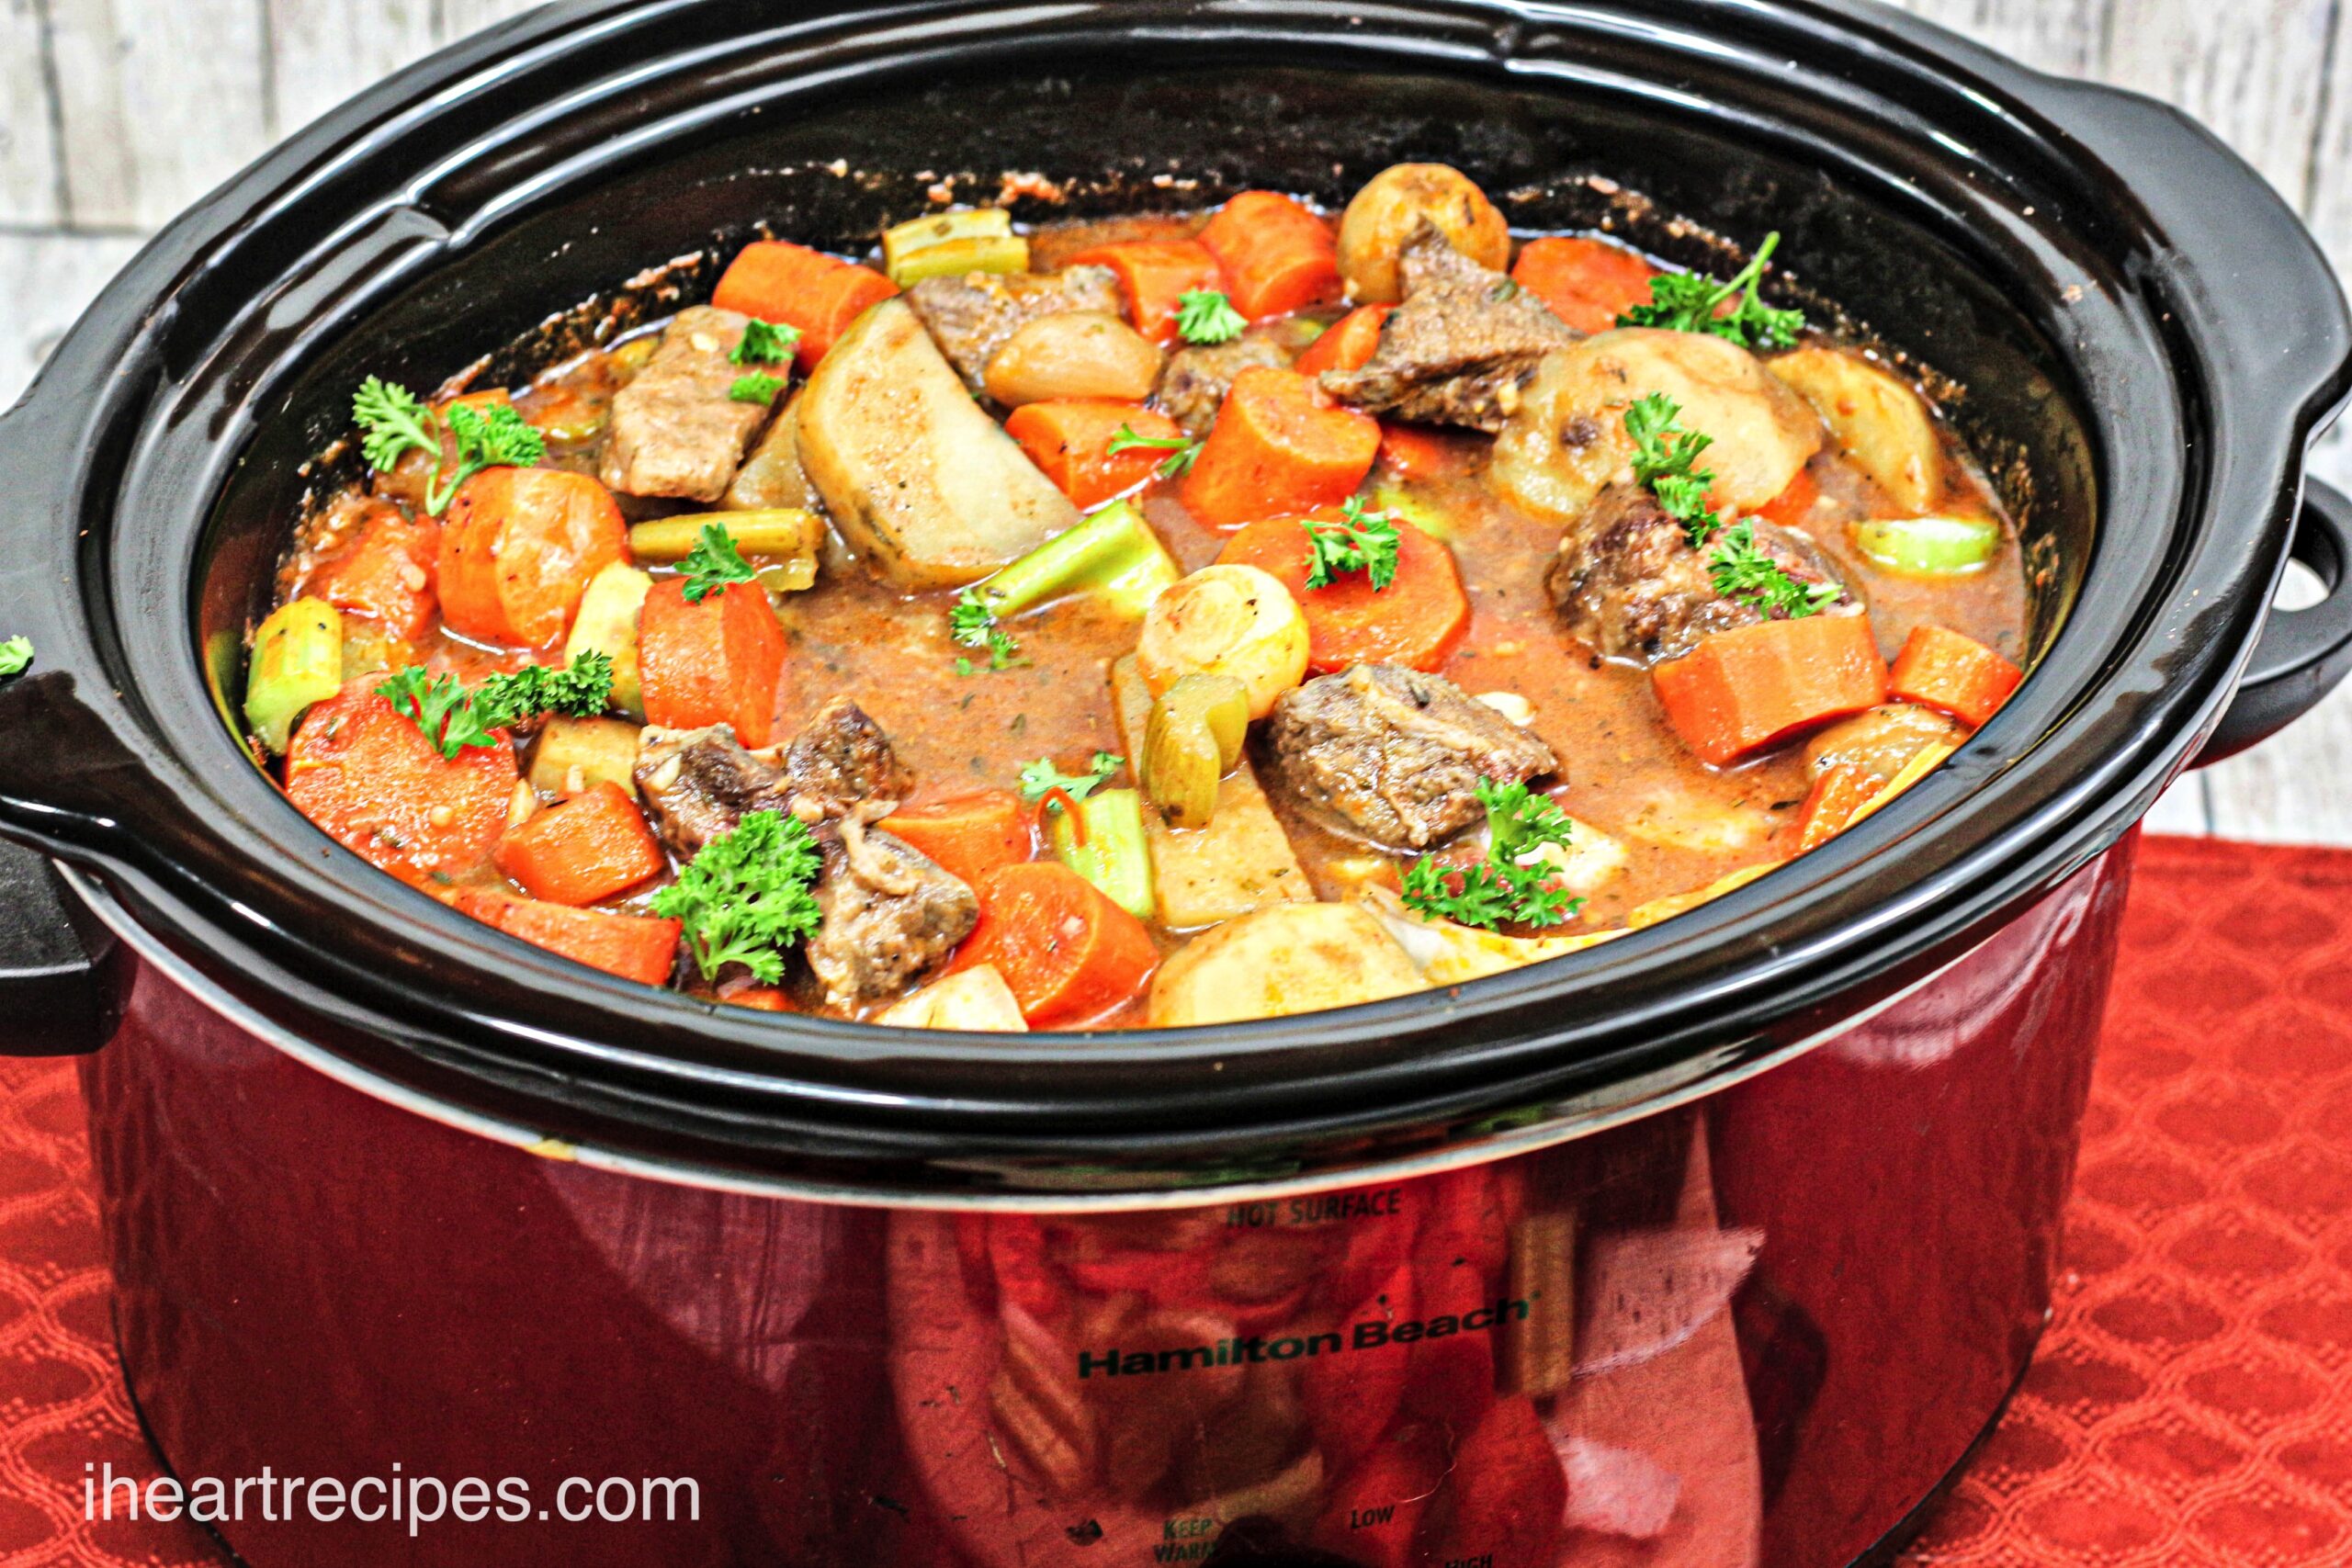 https://iheartrecipes.com/wp-content/uploads/2022/12/easy-slow-cooker-beef-stew_002-scaled.jpg